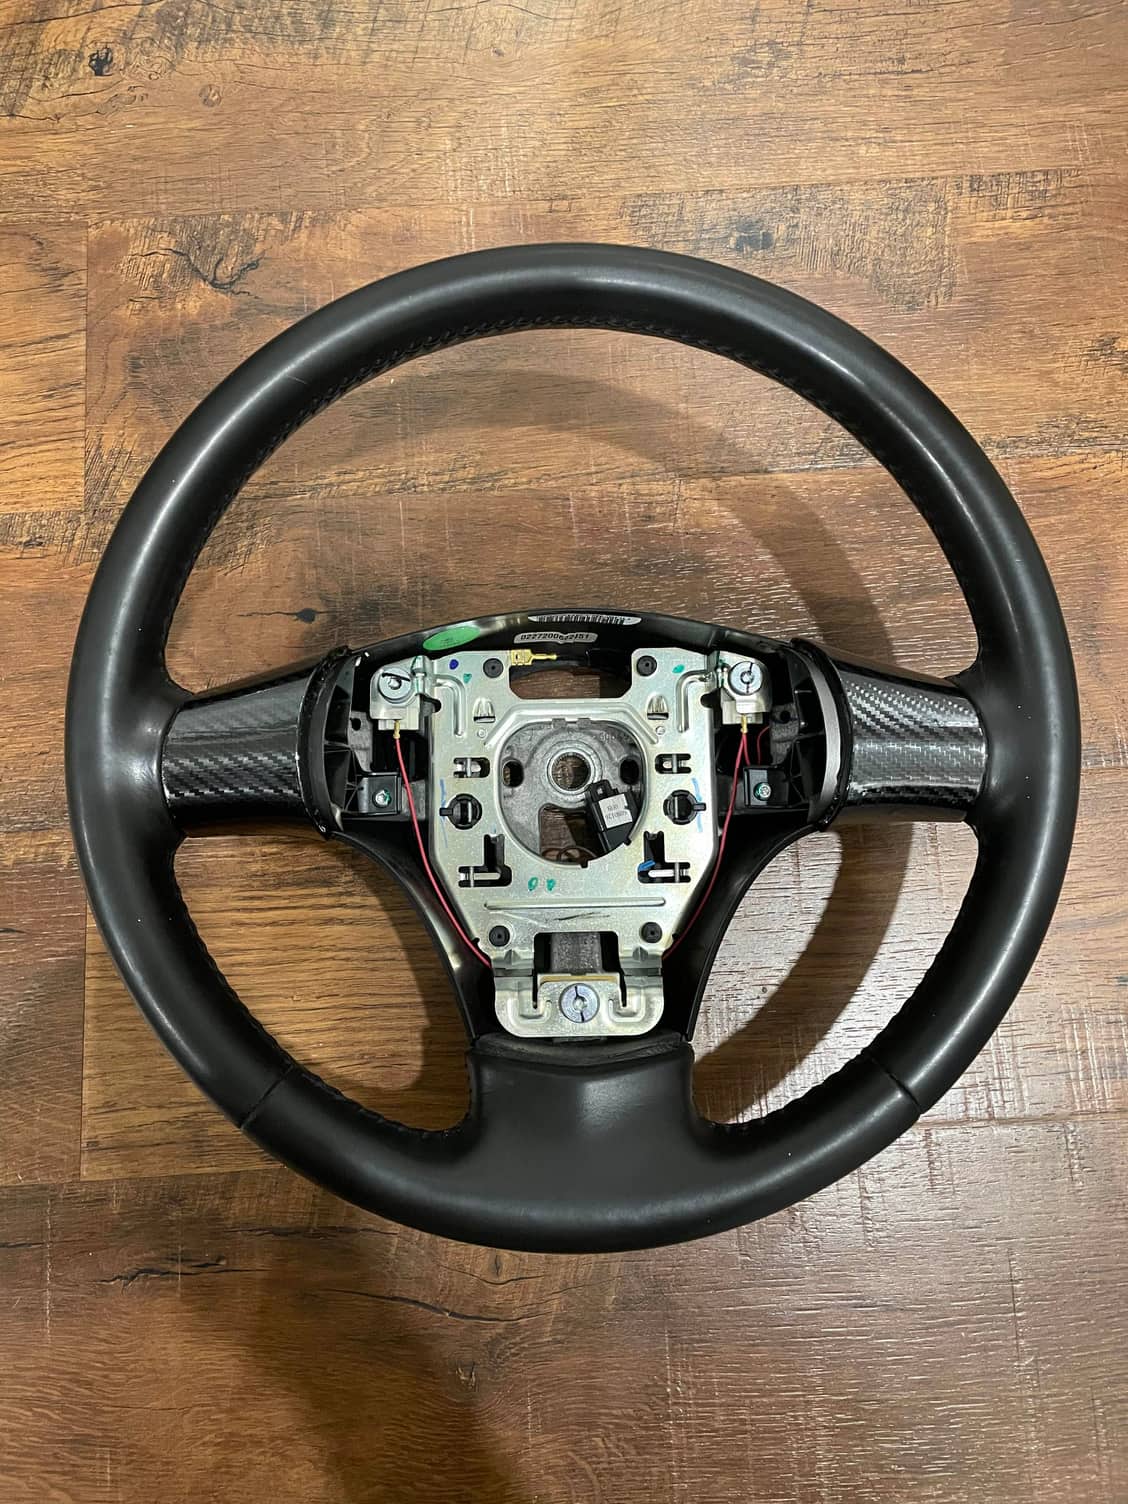 FS (For Sale) C6 Steering wheel with Airbag and Carbon sides ...